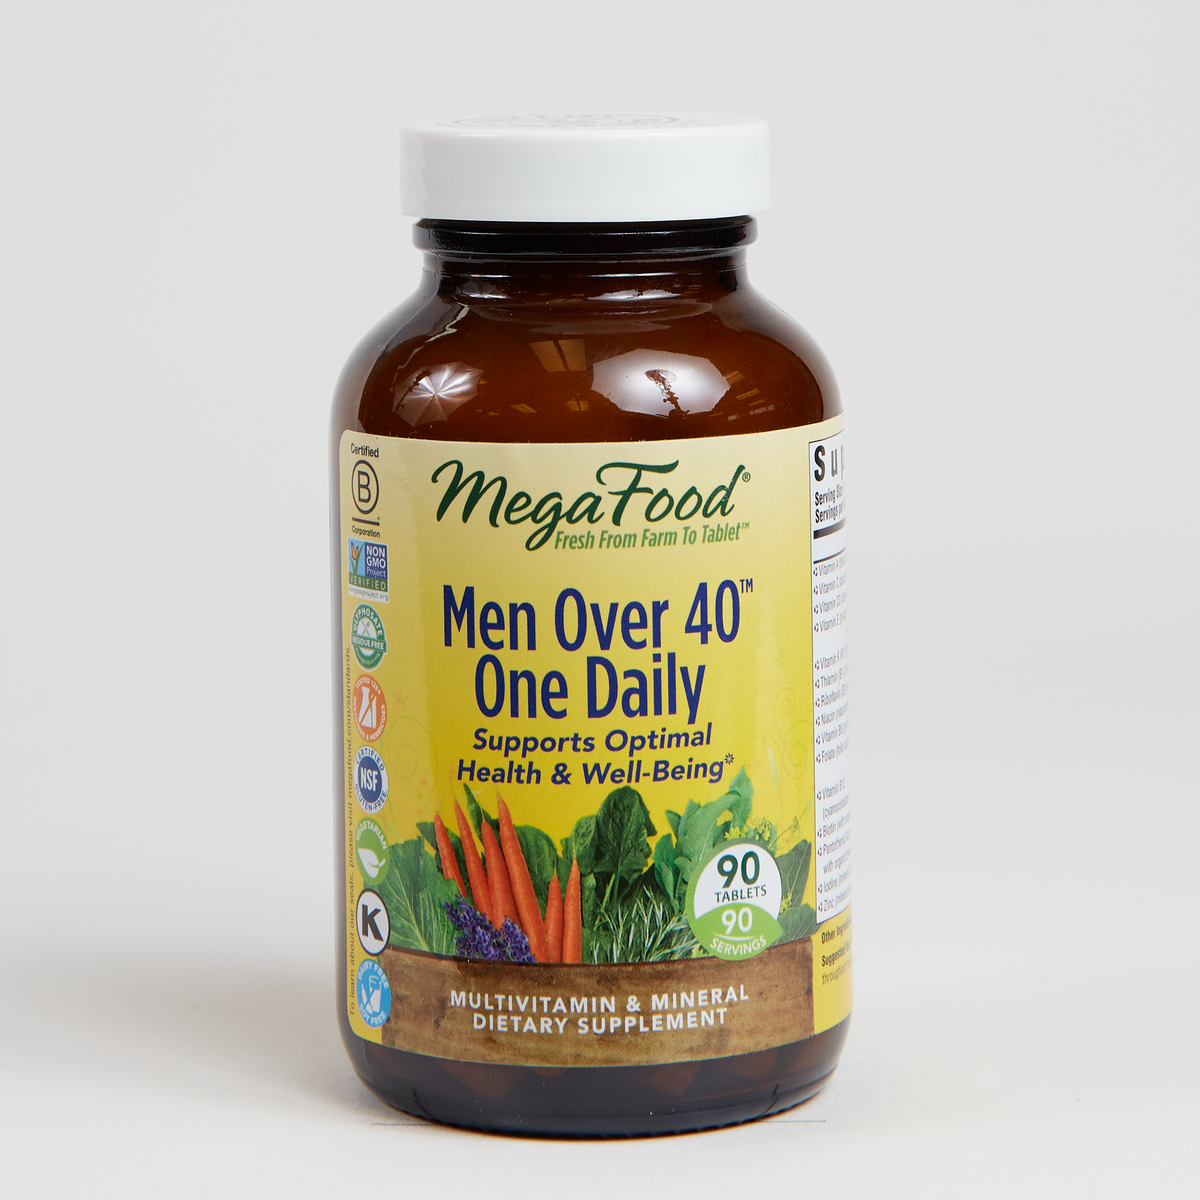 Megafood Men Over 40 One Daily - 90 Count